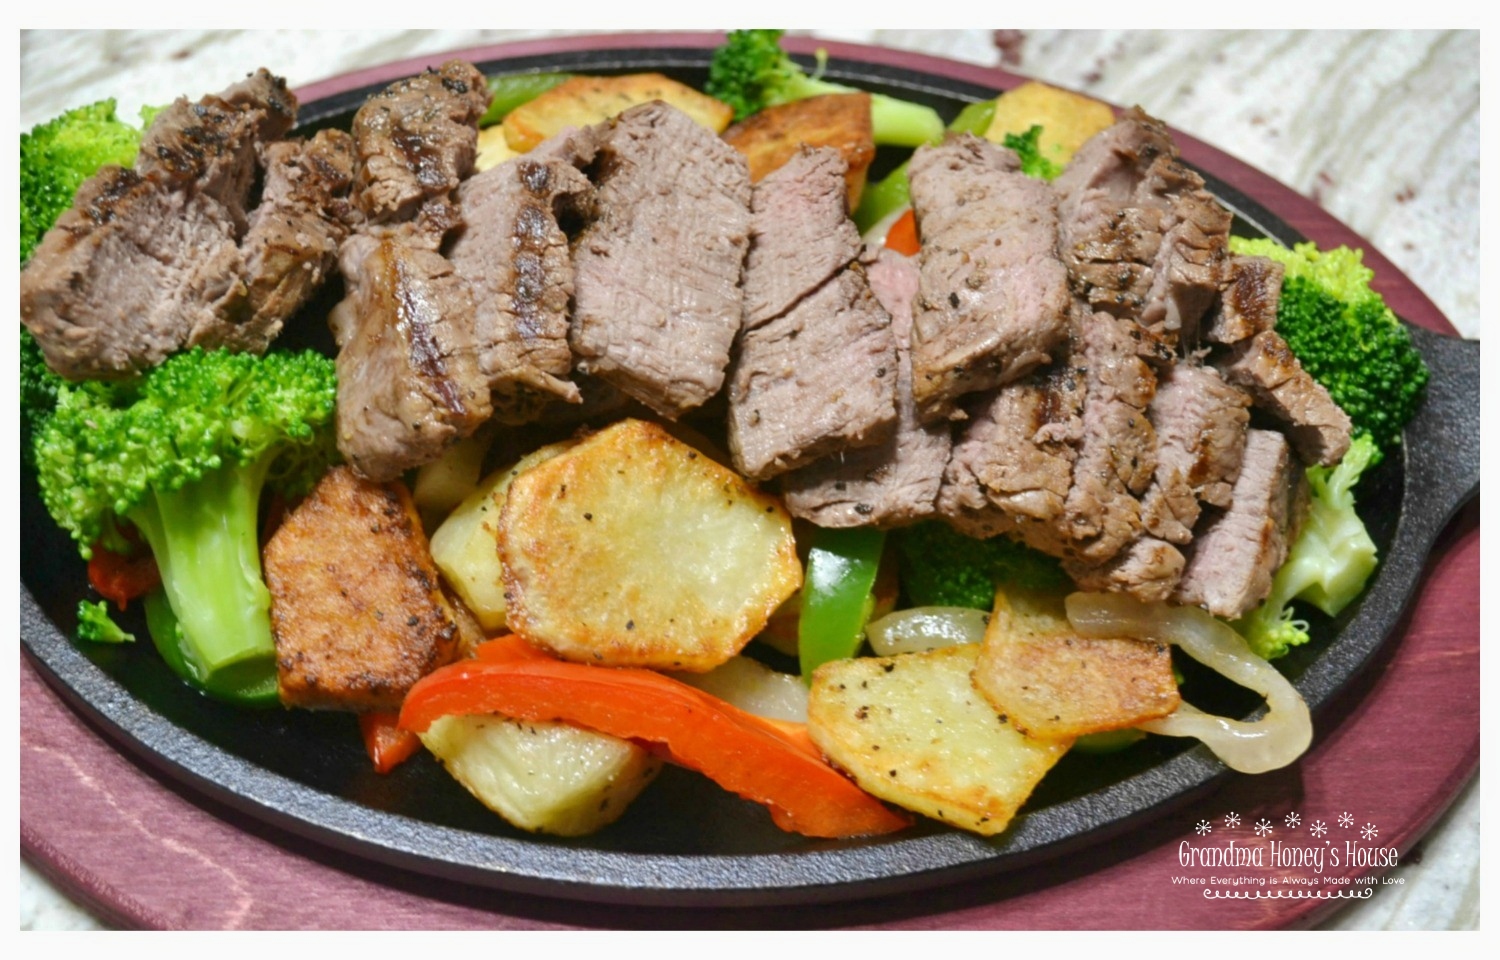 Sizzlin Steak and garlic roasted potato skillets are a delicious twist on a steak and potato dinner